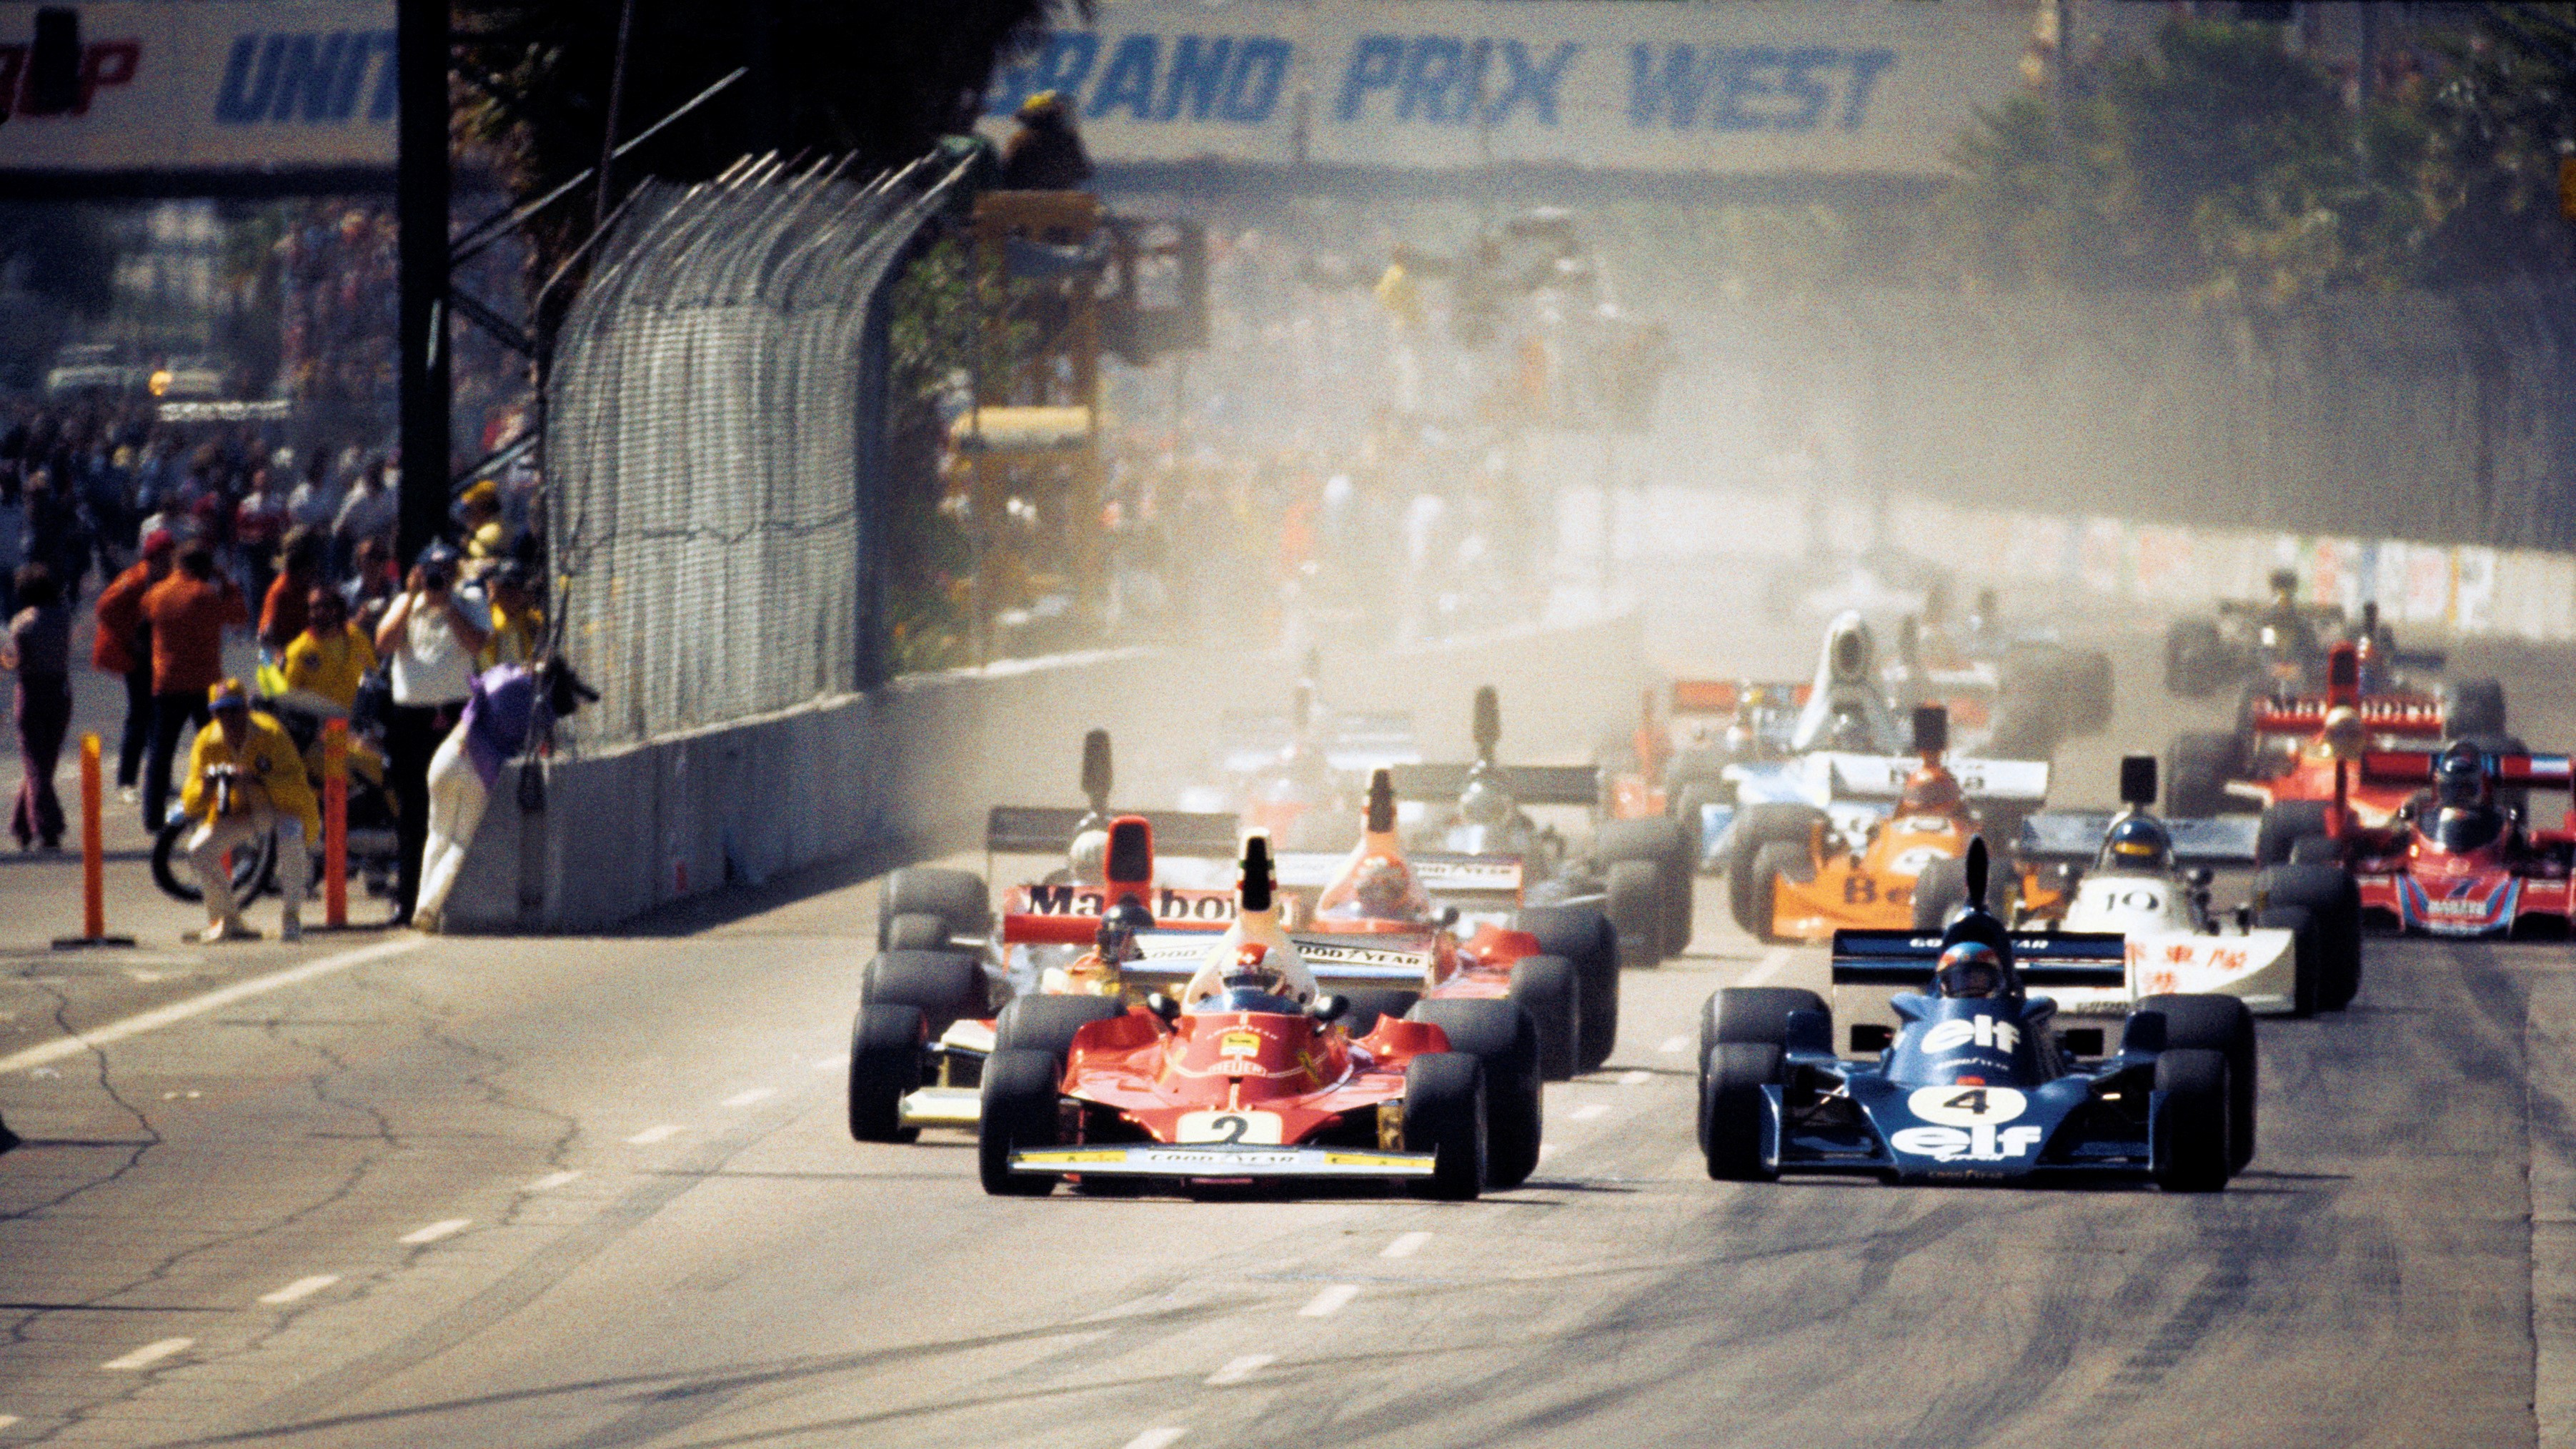 The start of inaugural Formula 1 Grand Prix West on March 26, 1976 in Long Beach.